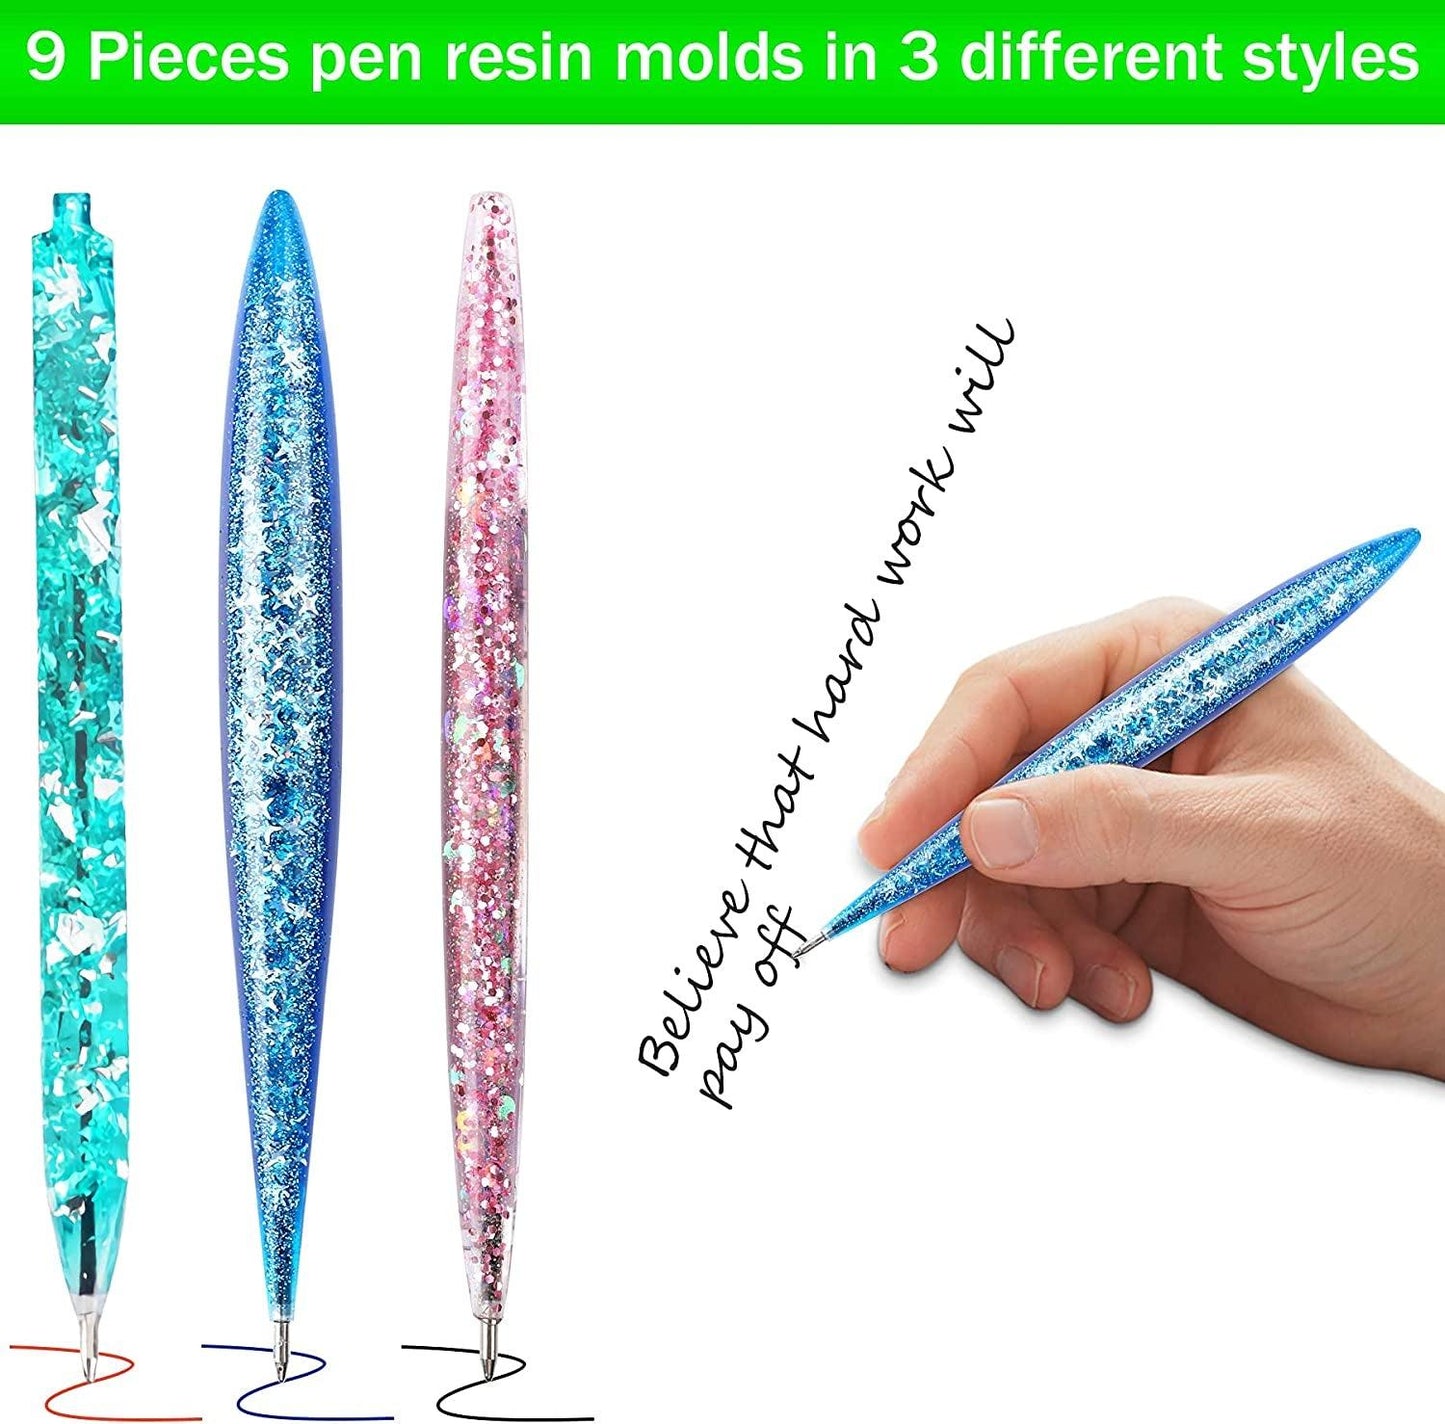 9 Pieces Pen Resin Mold, Epoxy Resin Molds with 75 Pieces Ink Pen Refills,Ballpoint Pen Silicone Molds Resin Casting Molds for DIY Resin Crafts Making - WoodArtSupply